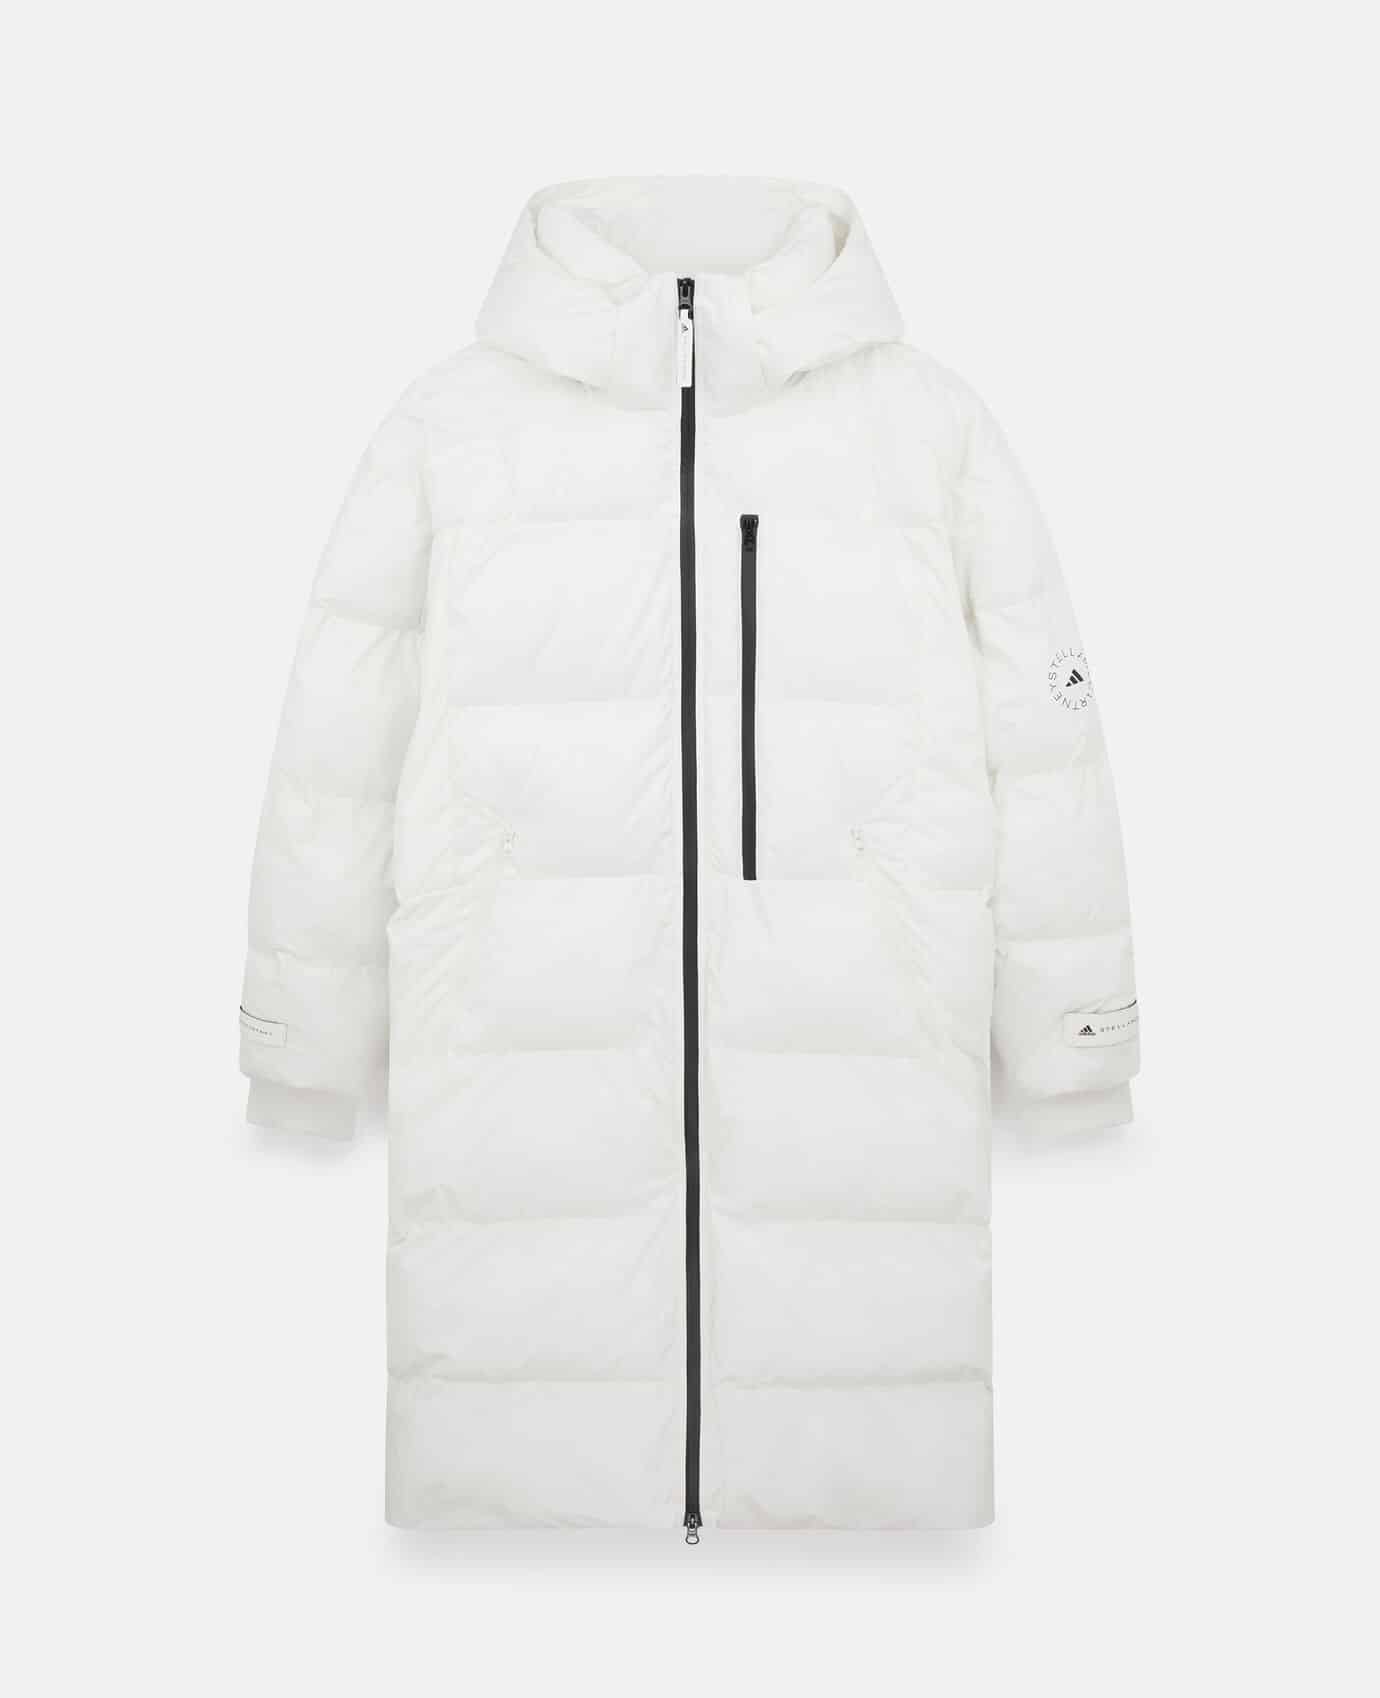 White quilted vegan puffer jacket with full length zip and adidas by Stella McCartney logo on the arm